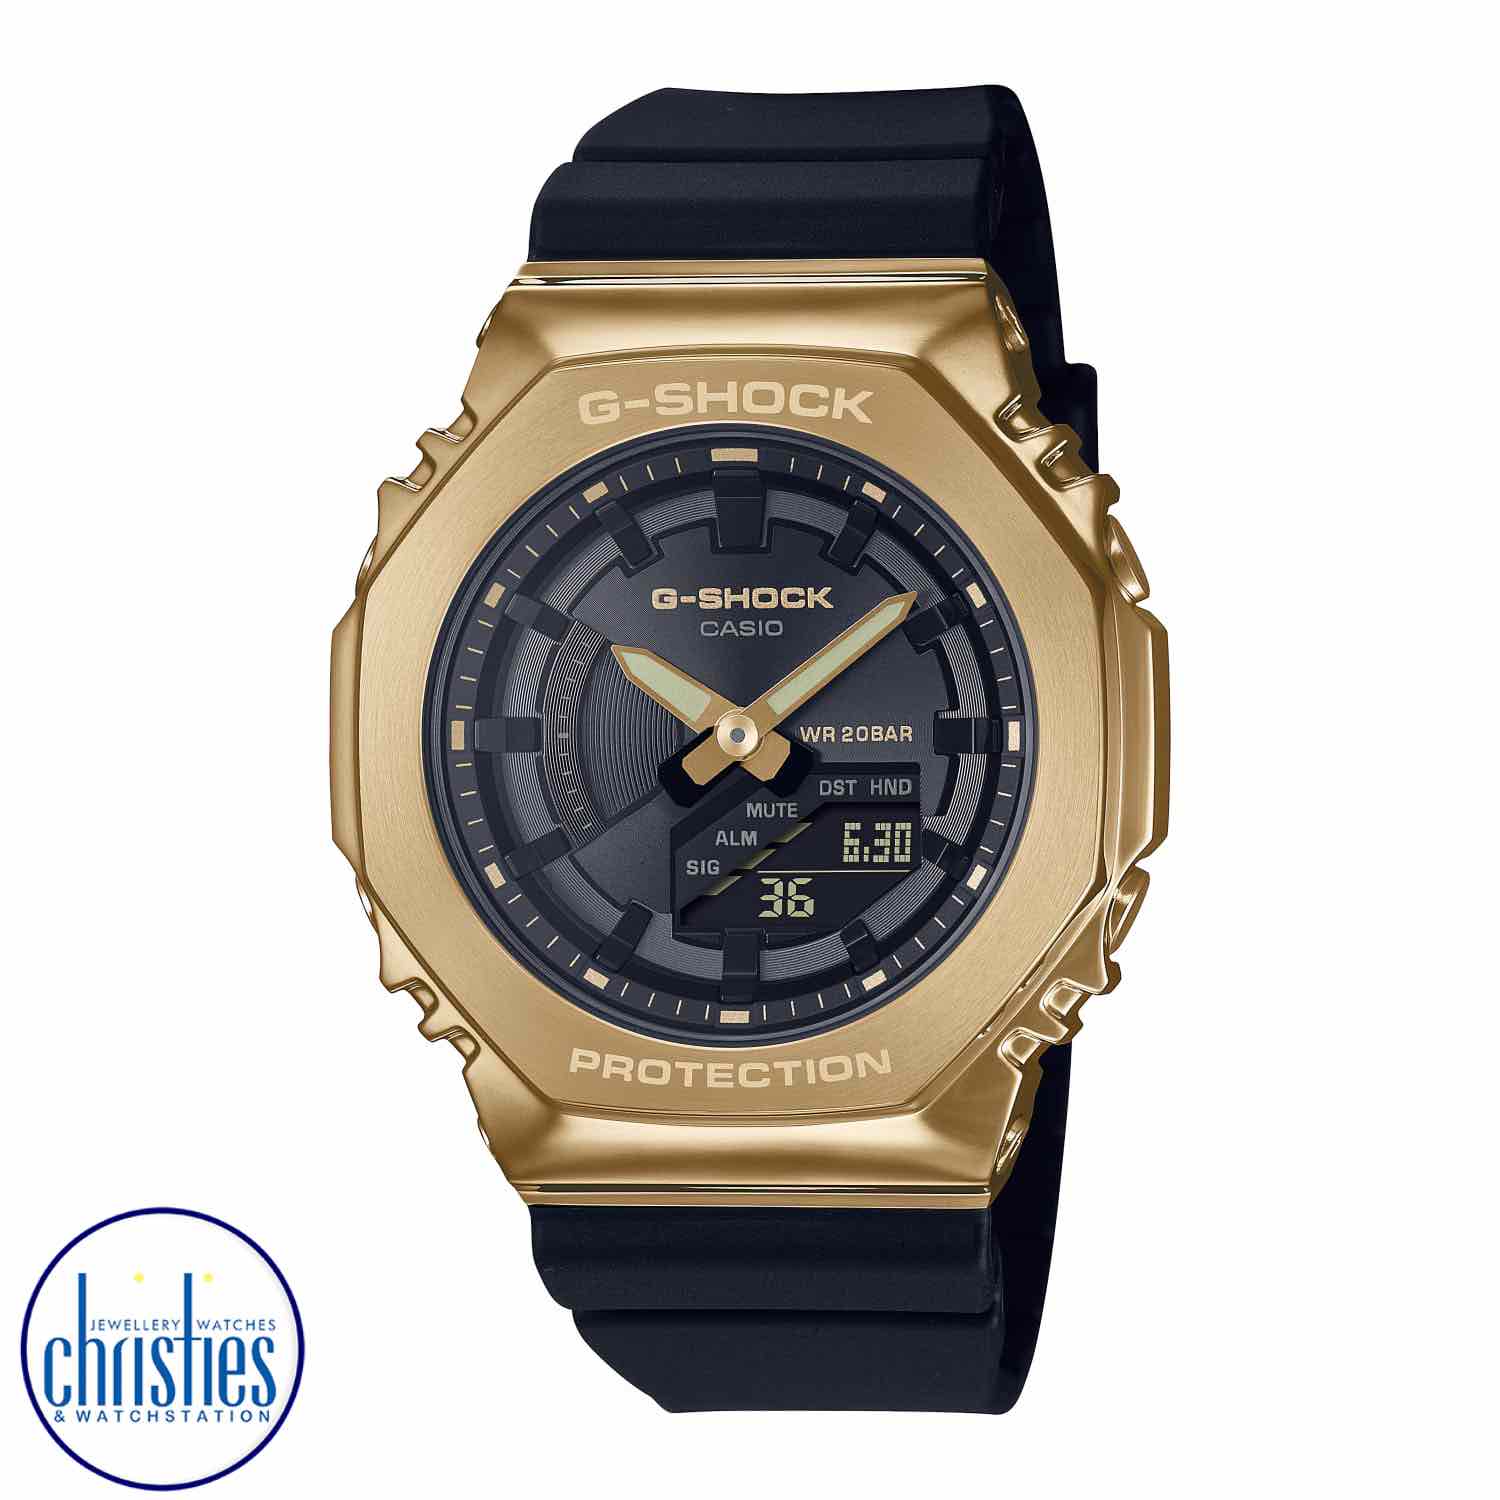 GMS2100GB-1 Casio G-Shock Black Gold Watch. Go metal-clad with a gold-on-black G-SHOCK in a smaller, more compact profile.